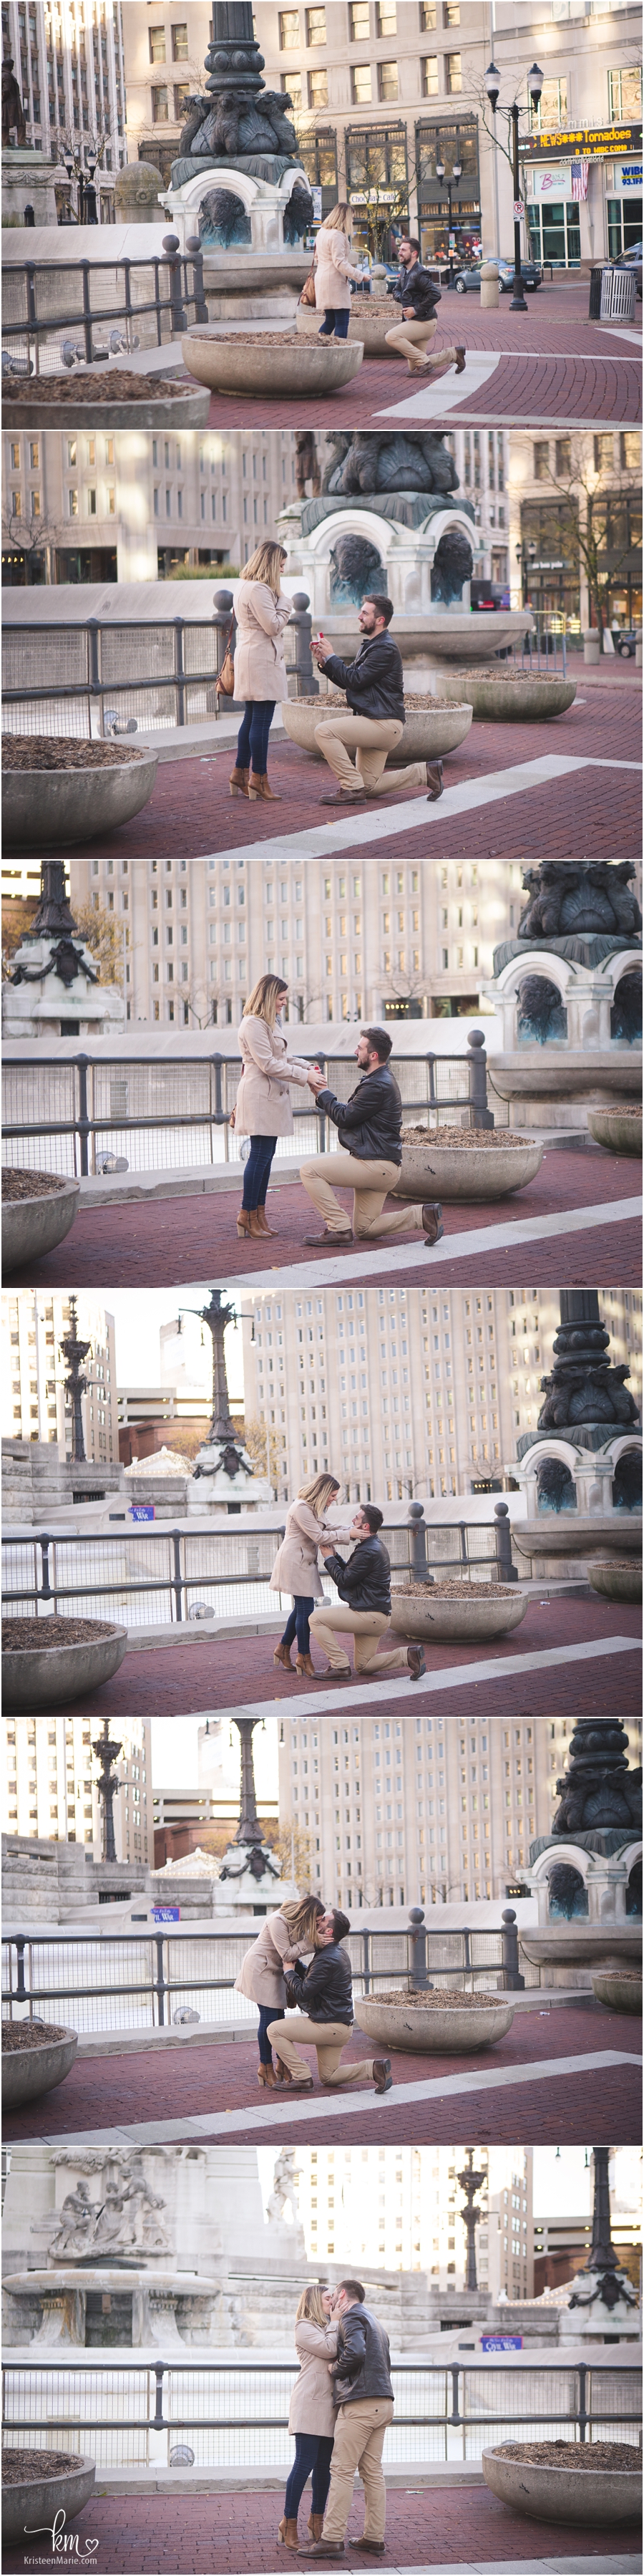 downtown Indianapolis proposal photography